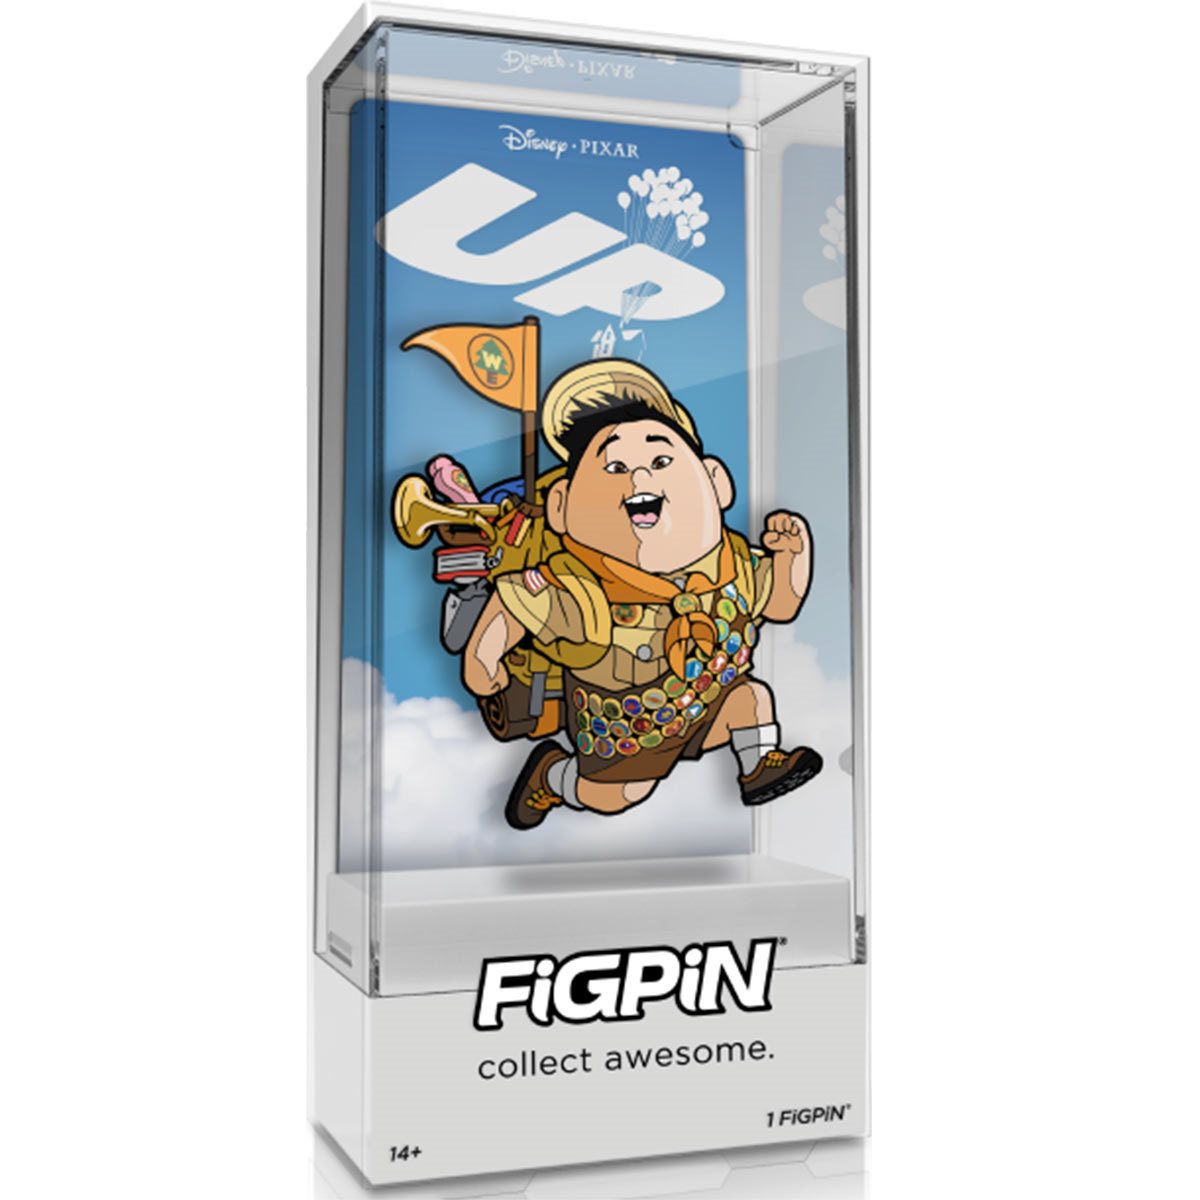 Up Russell FiGPiN Classic 3-Inch Enamel Pin Box